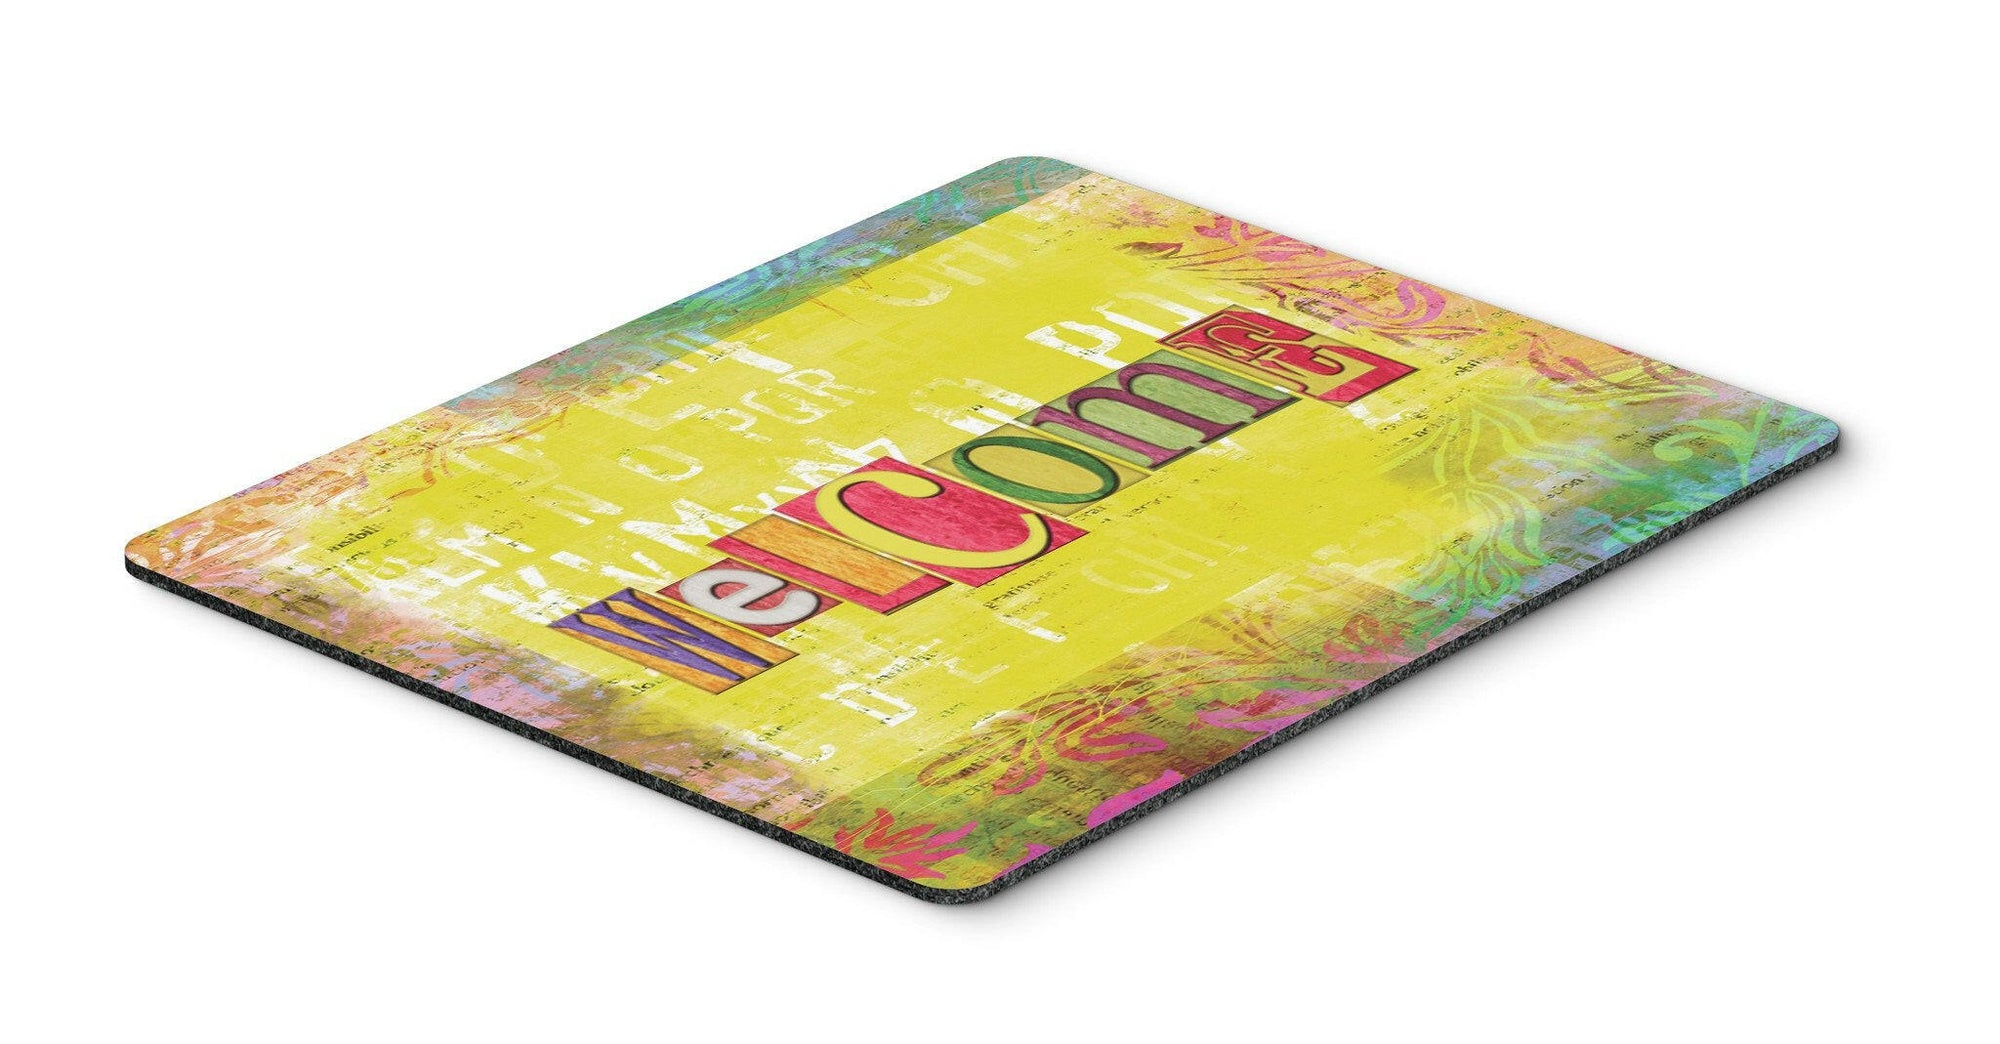 Artsy Welcome Mouse Pad, Hot Pad or Trivet SB3097MP by Caroline's Treasures